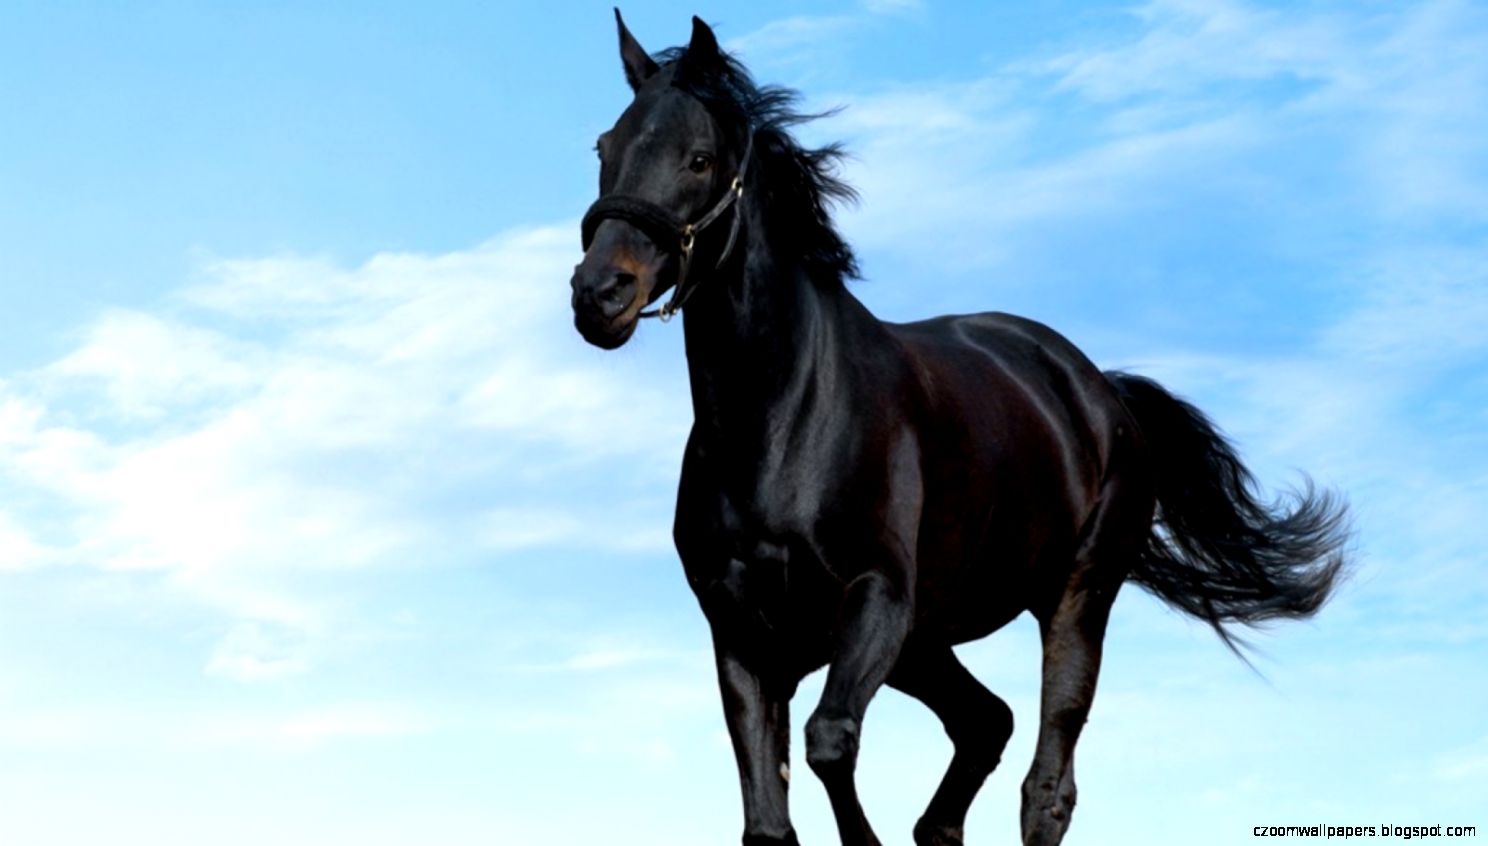 Awesome Hd Desktop Wallpapers Of Black Horse Running At Beach